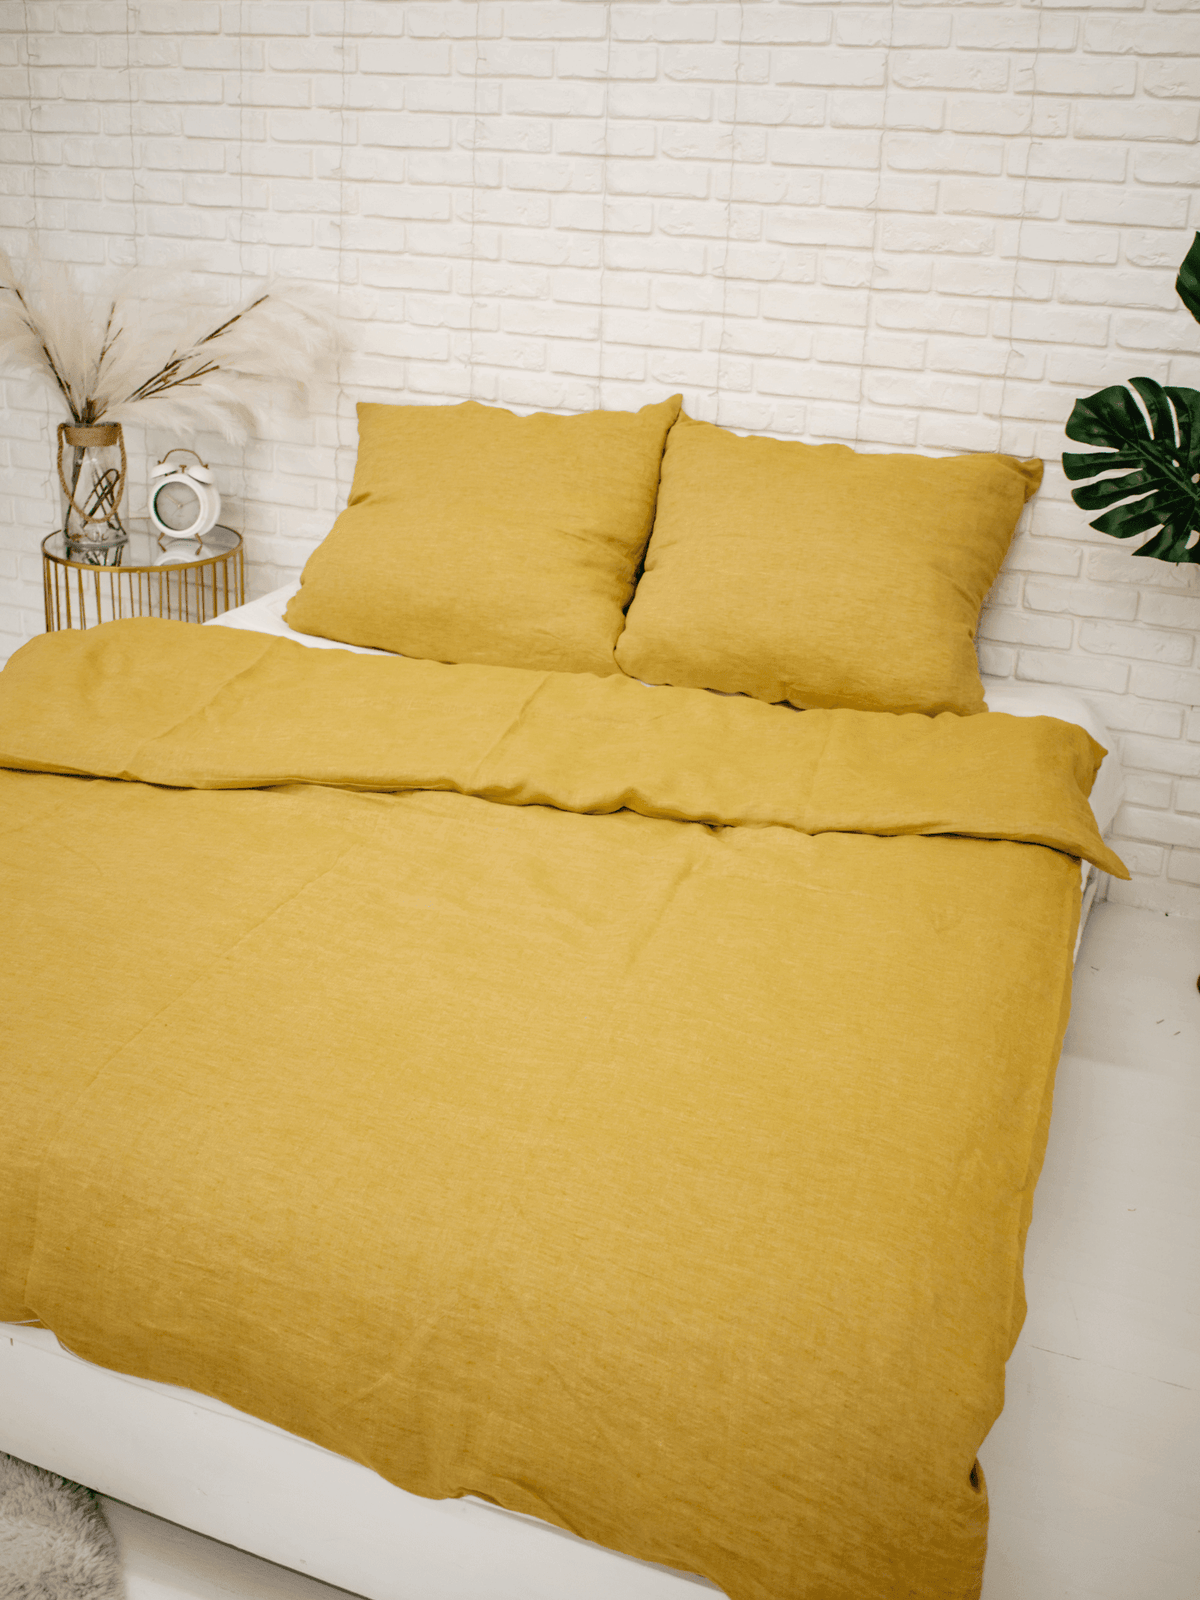 Turmeric Yellow Soft Linen Bedding Set (The set includes 4 items of yellow color) - Bedroom, label, Linen bedding set - FlaxLin Eco Textiles